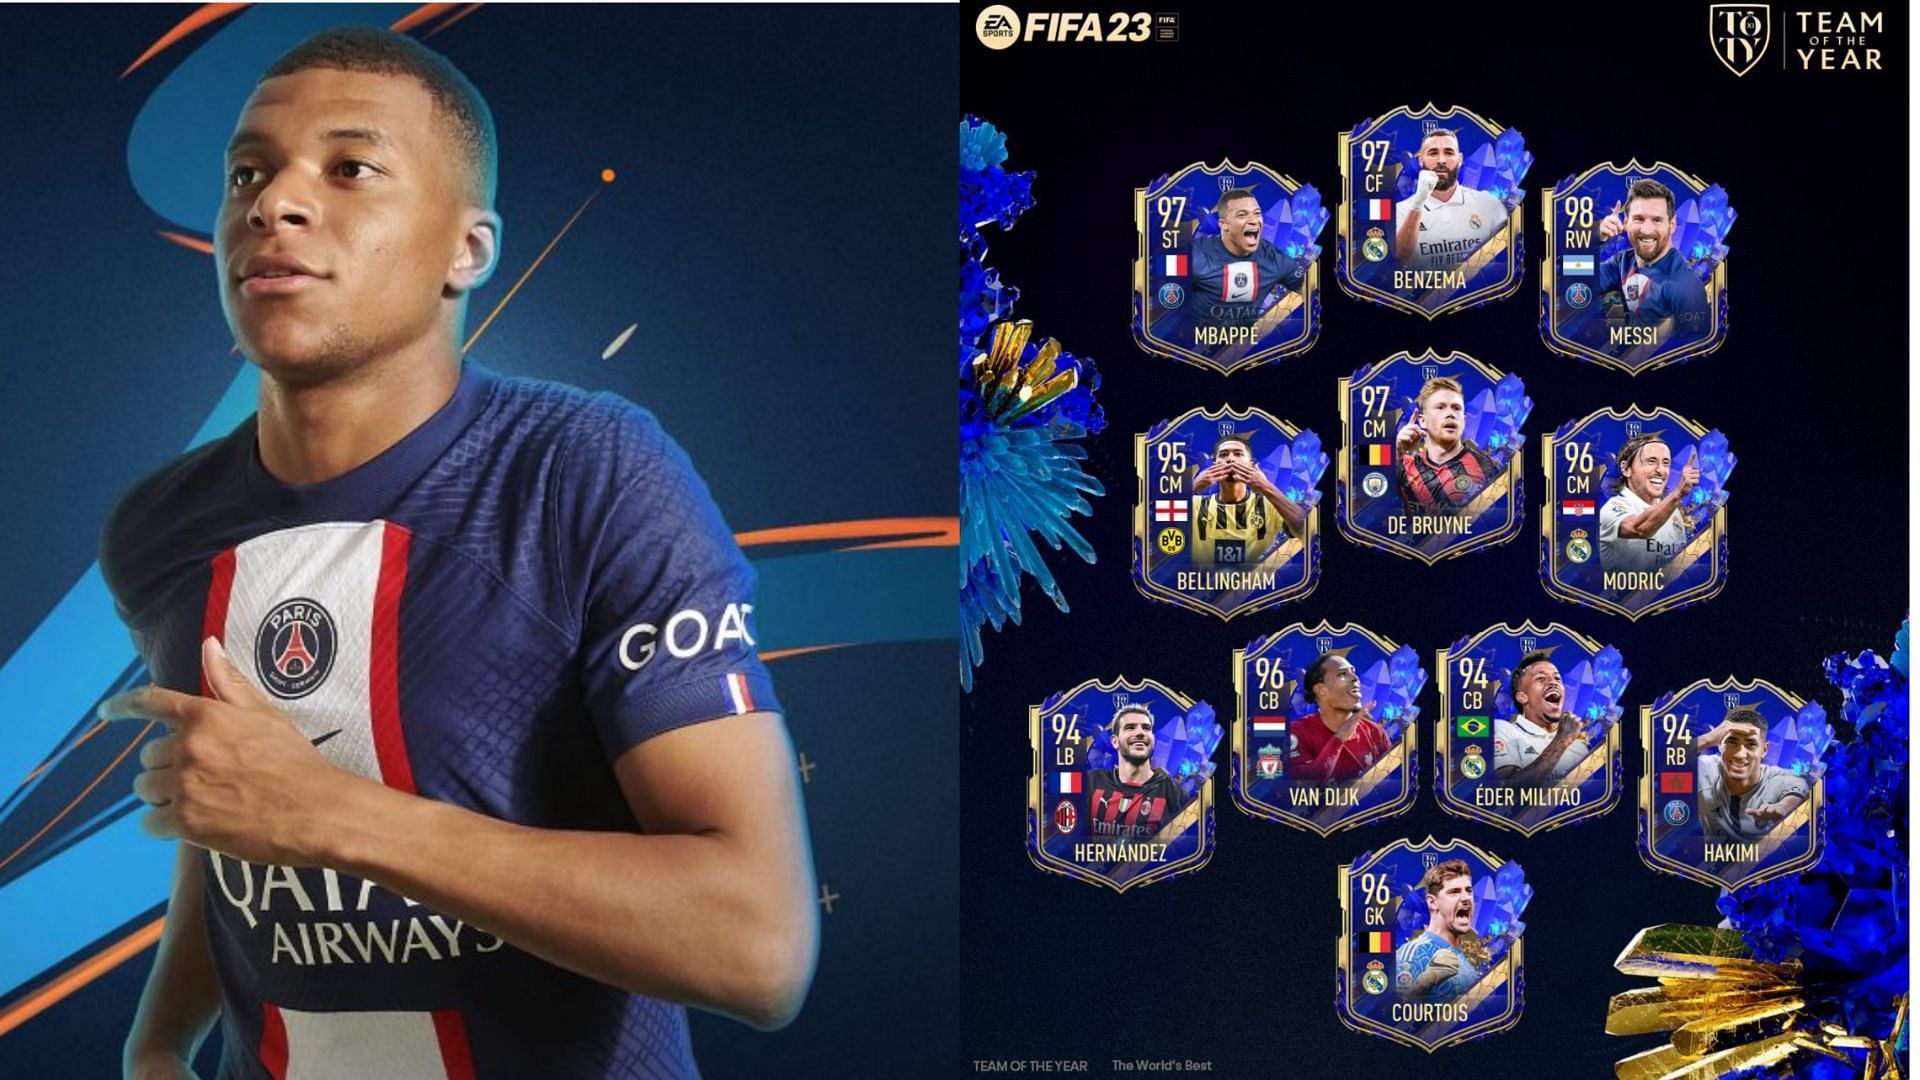 FIFA Mobile announces TOTY promo coming to the game